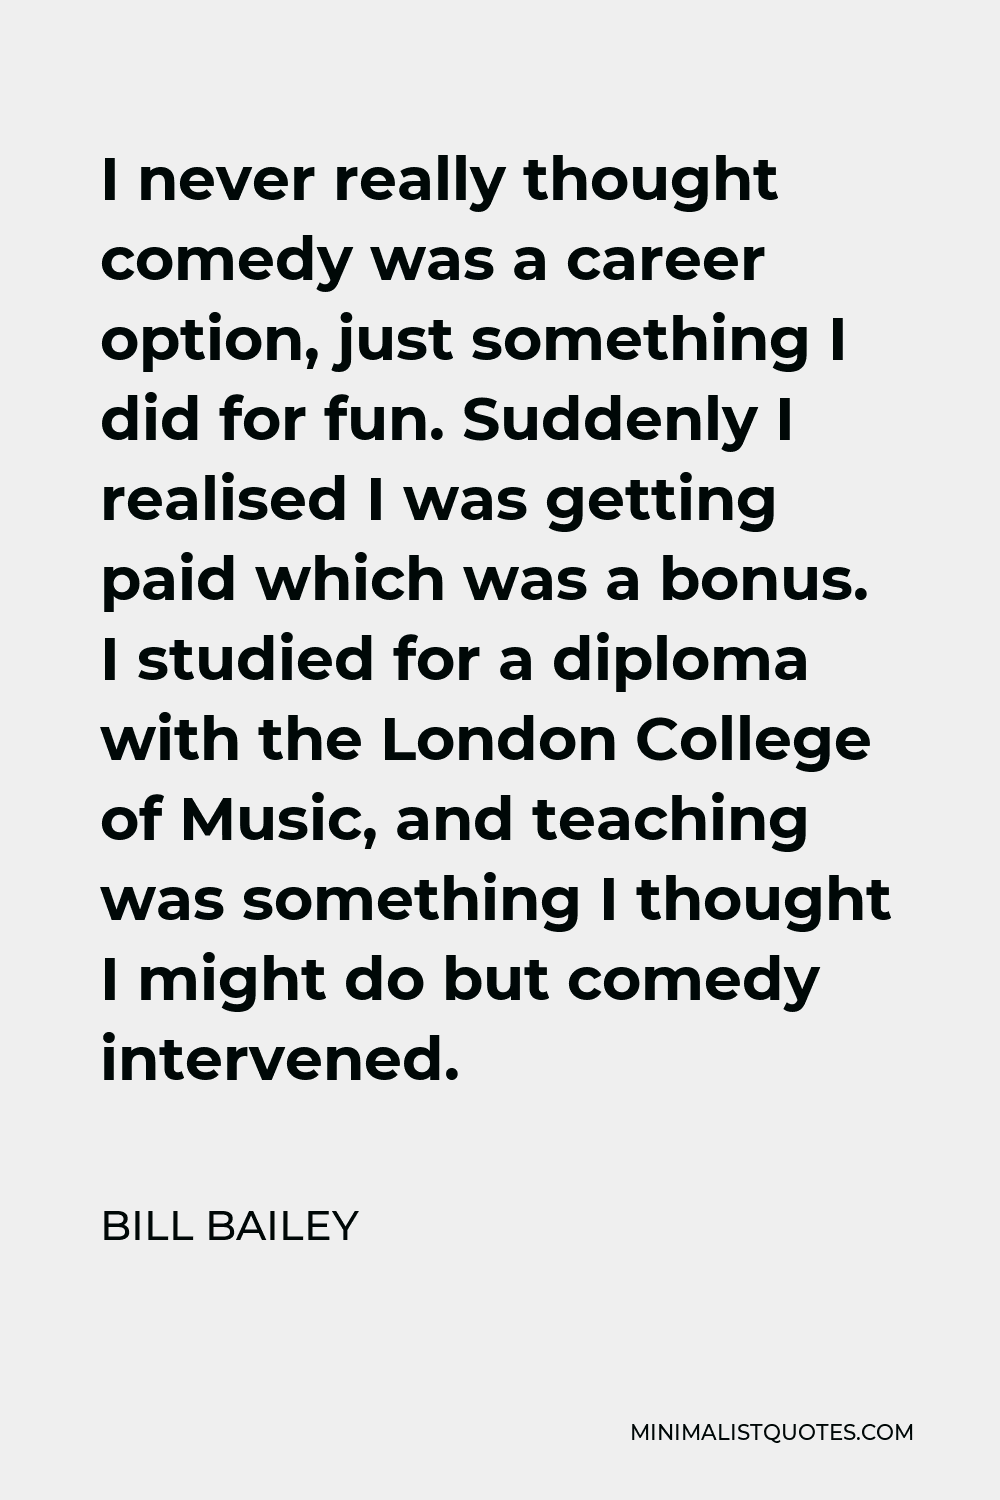 Bill Bailey Quote - I never really thought comedy was a career option, just something I did for fun. Suddenly I realised I was getting paid which was a bonus. I studied for a diploma with the London College of Music, and teaching was something I thought I might do but comedy intervened.